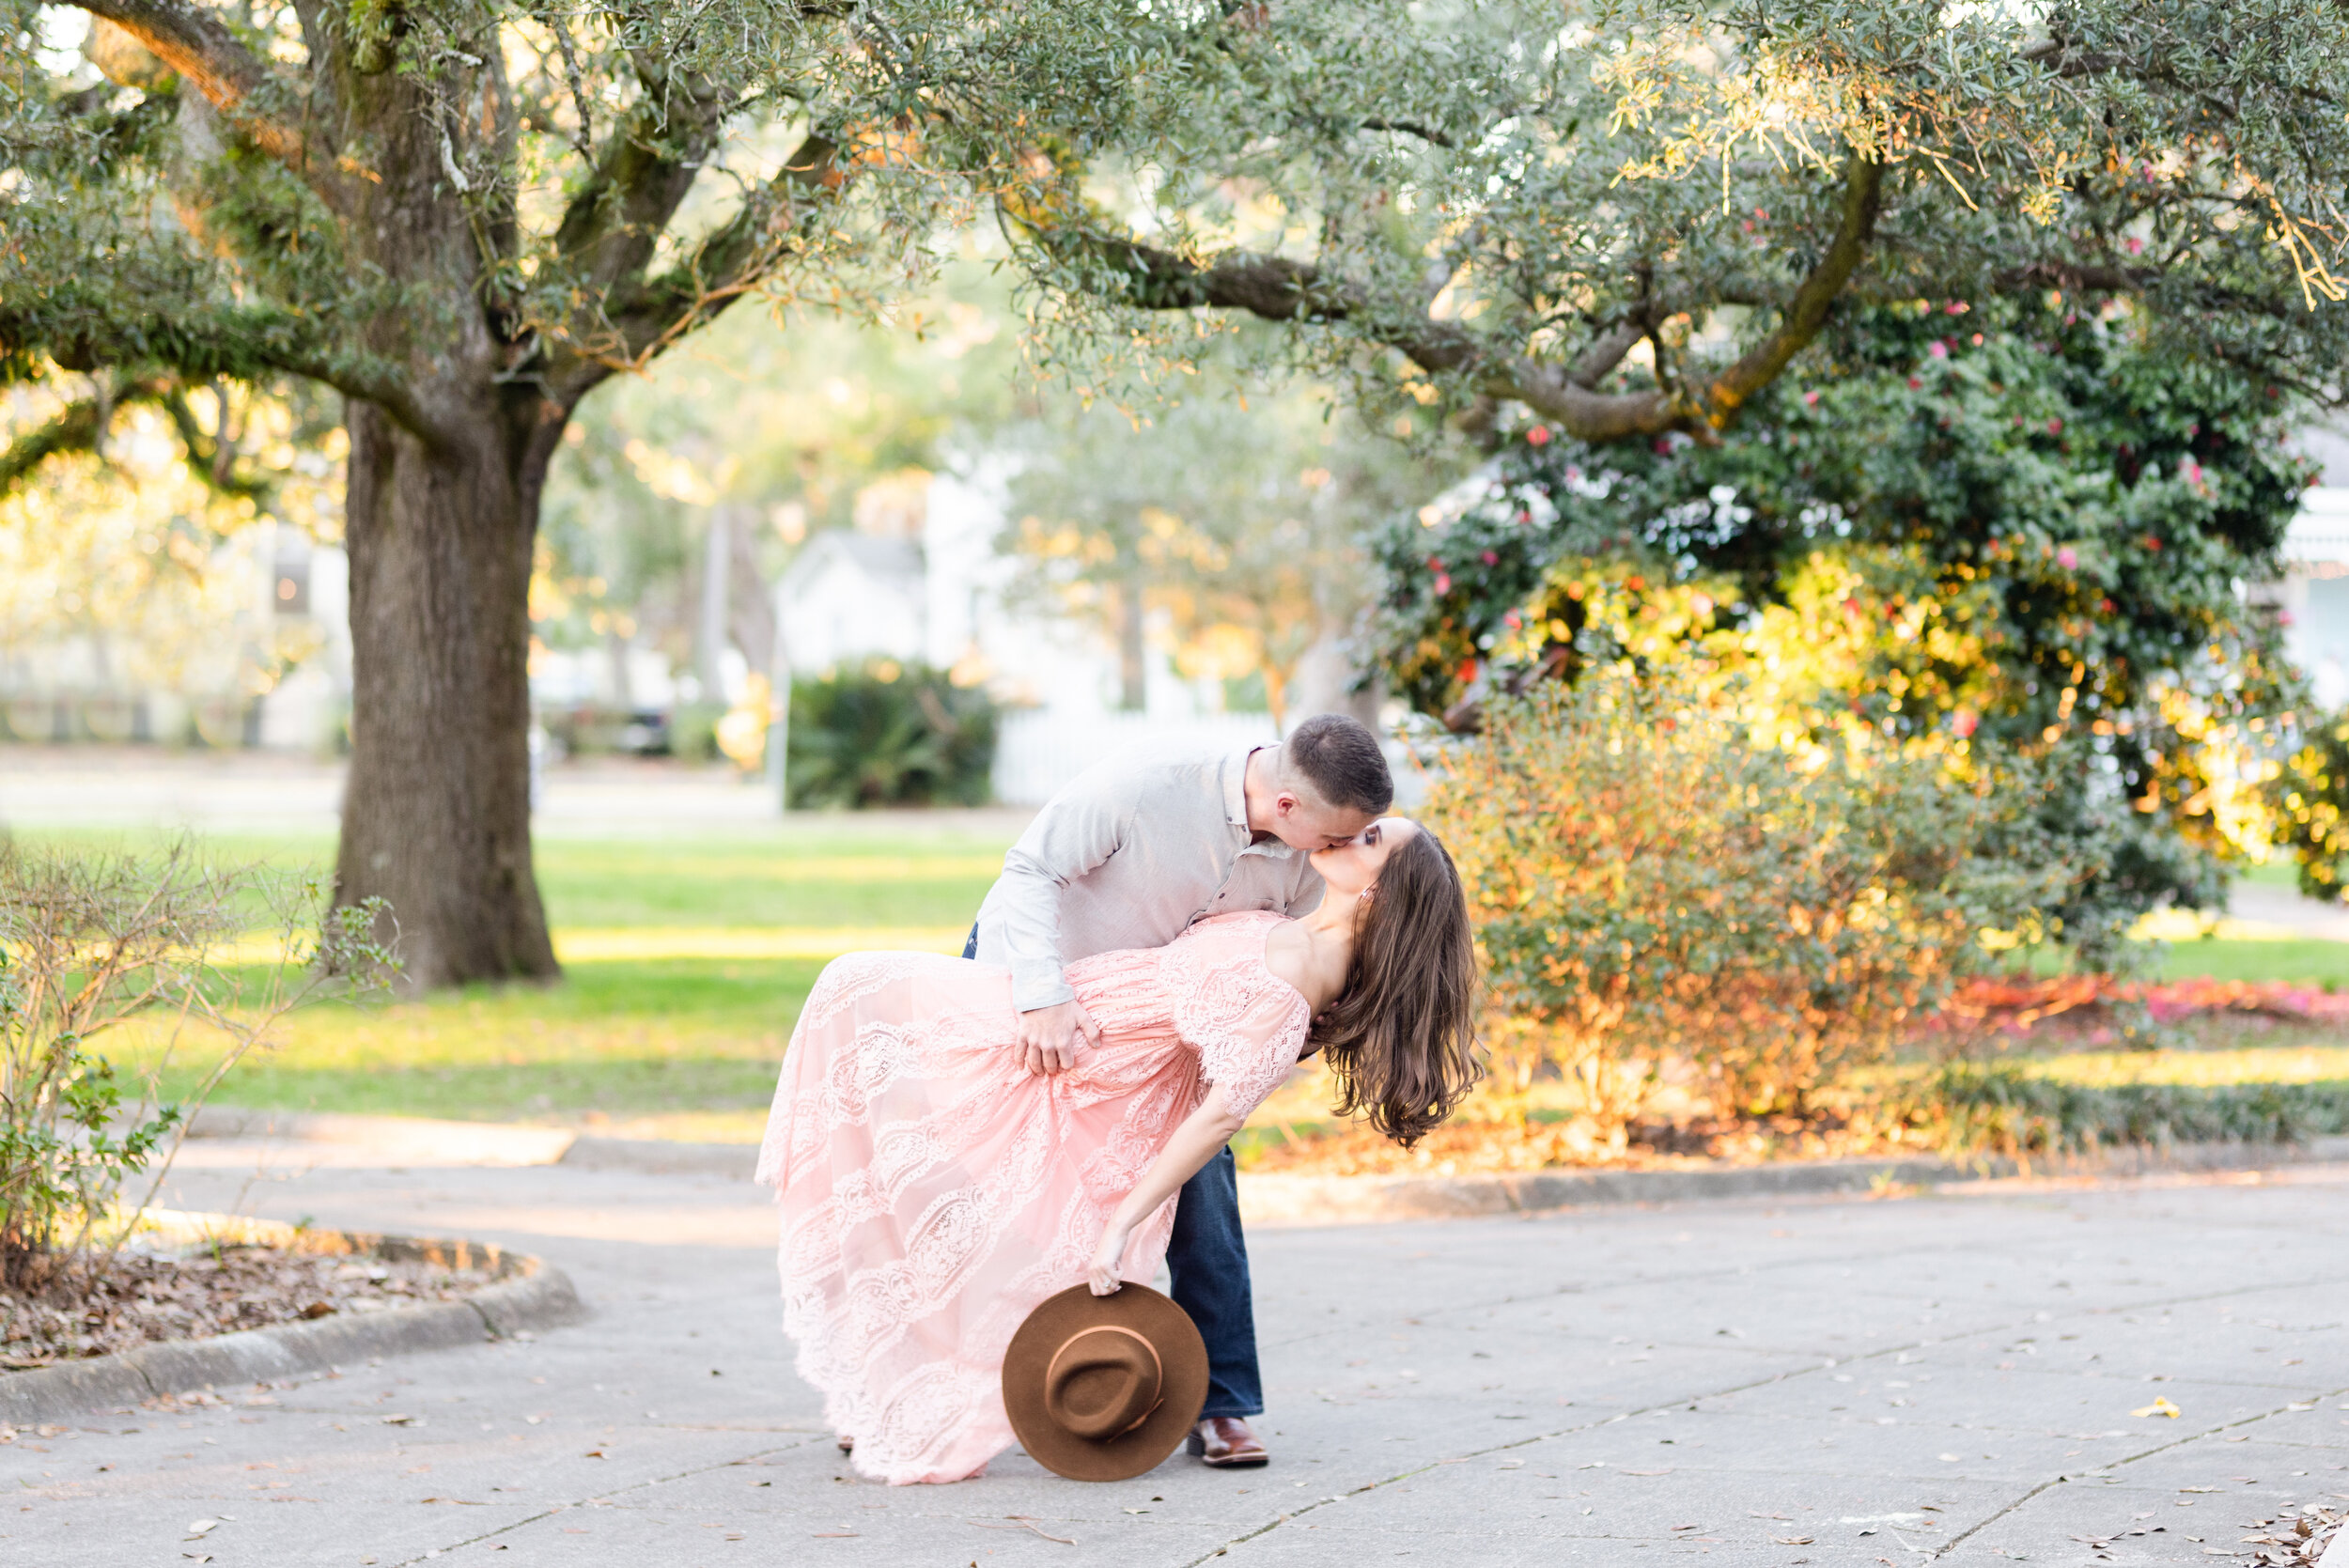 Washington Square Engagement Session Portraits of Rachel + Chase's Engagement Photographed by Kristen Marcus Photography